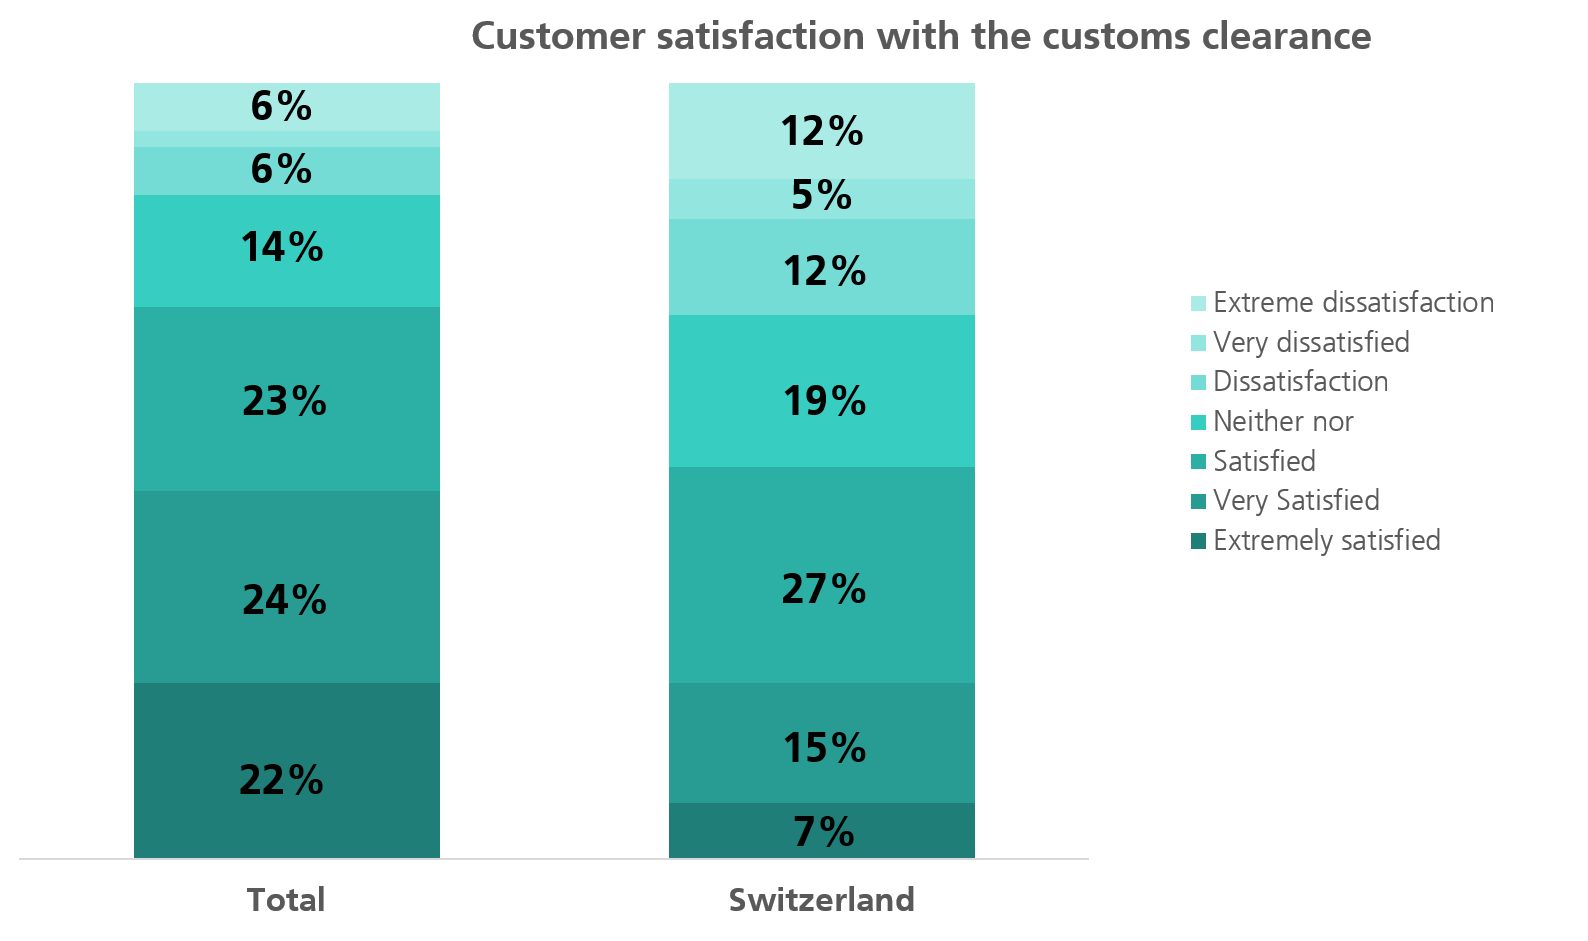 Customer satisfaction with customs clearance